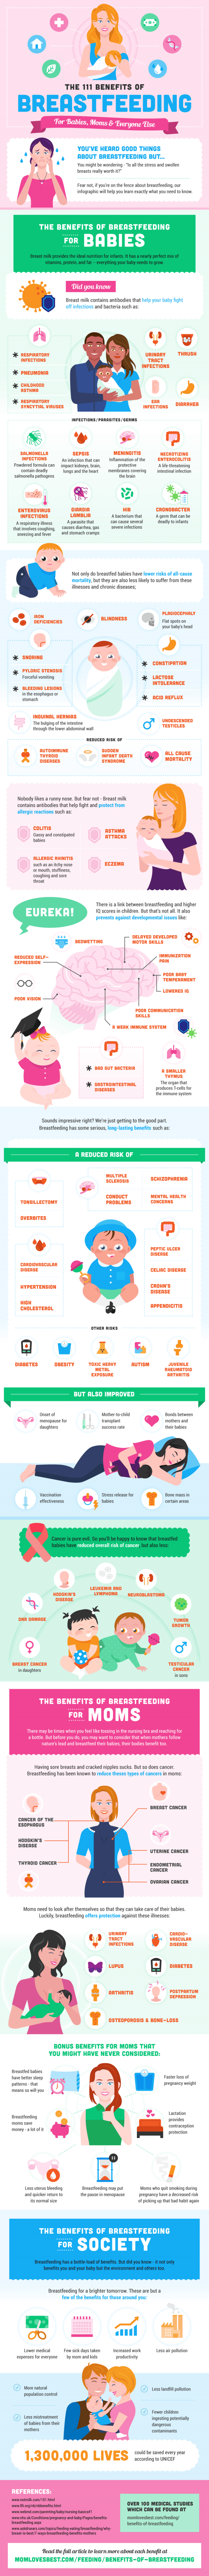 The-Benefits-Of-Breastfeeding-Infographic-by-MomLovesBest-HQ